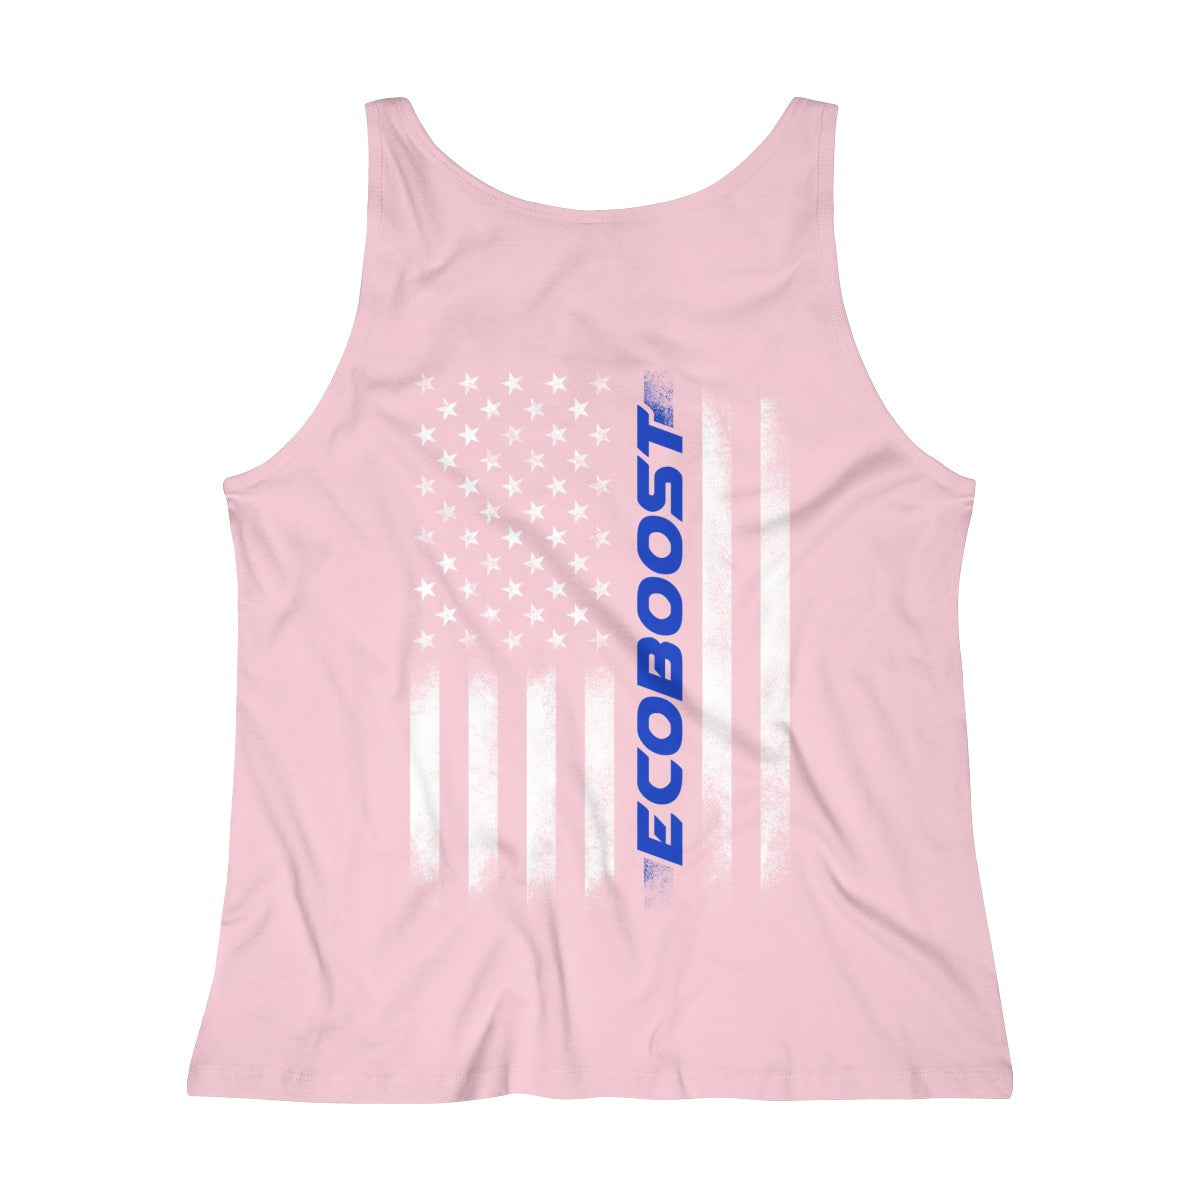 American Flag Ecoboost Tank Top (Blue) - 5ohNation